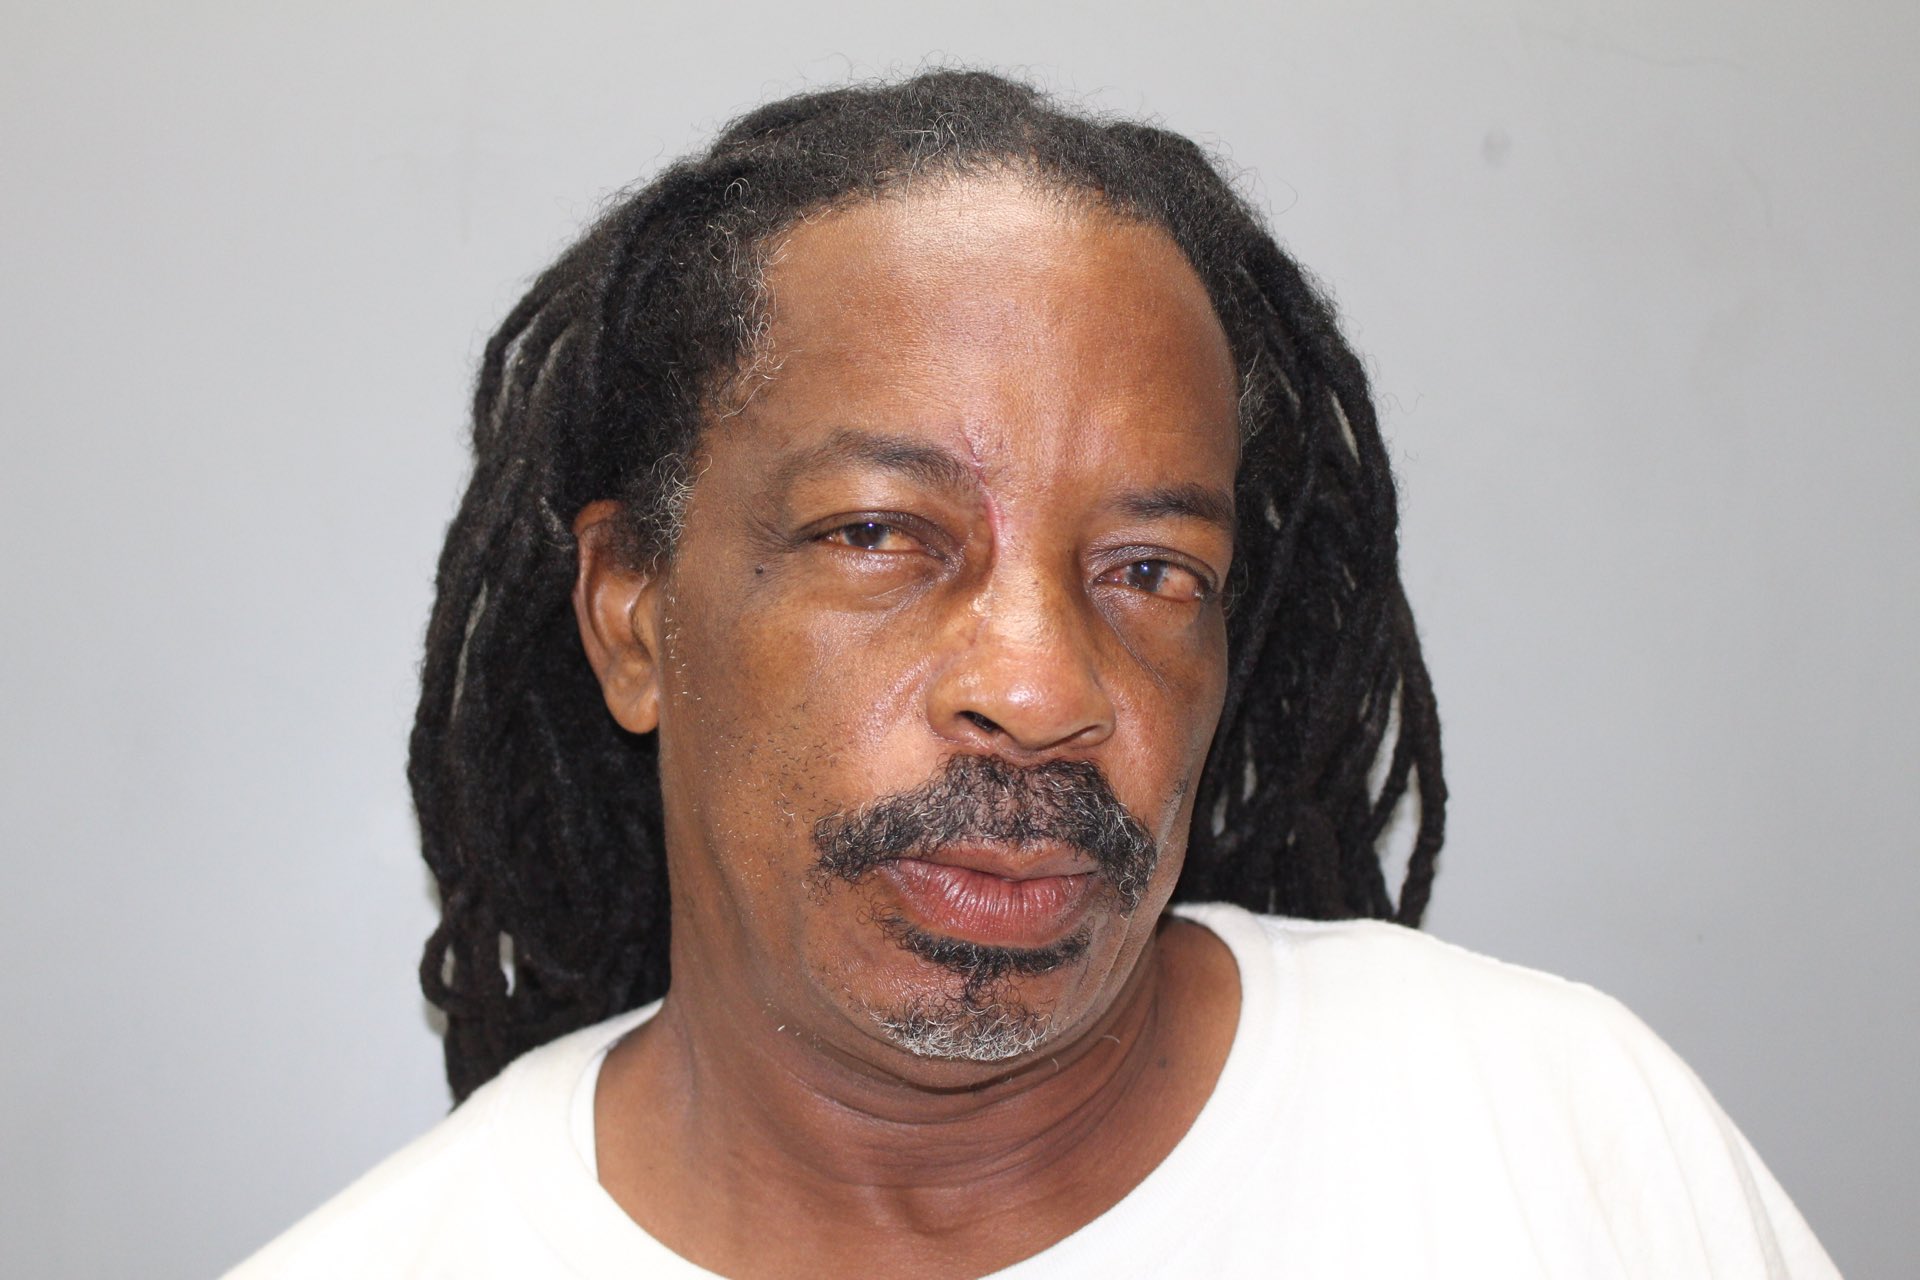 St. Thomas Man Arrested On Illegal Gun, Domestic Violence Charges Thursday Afternoon: VIPD